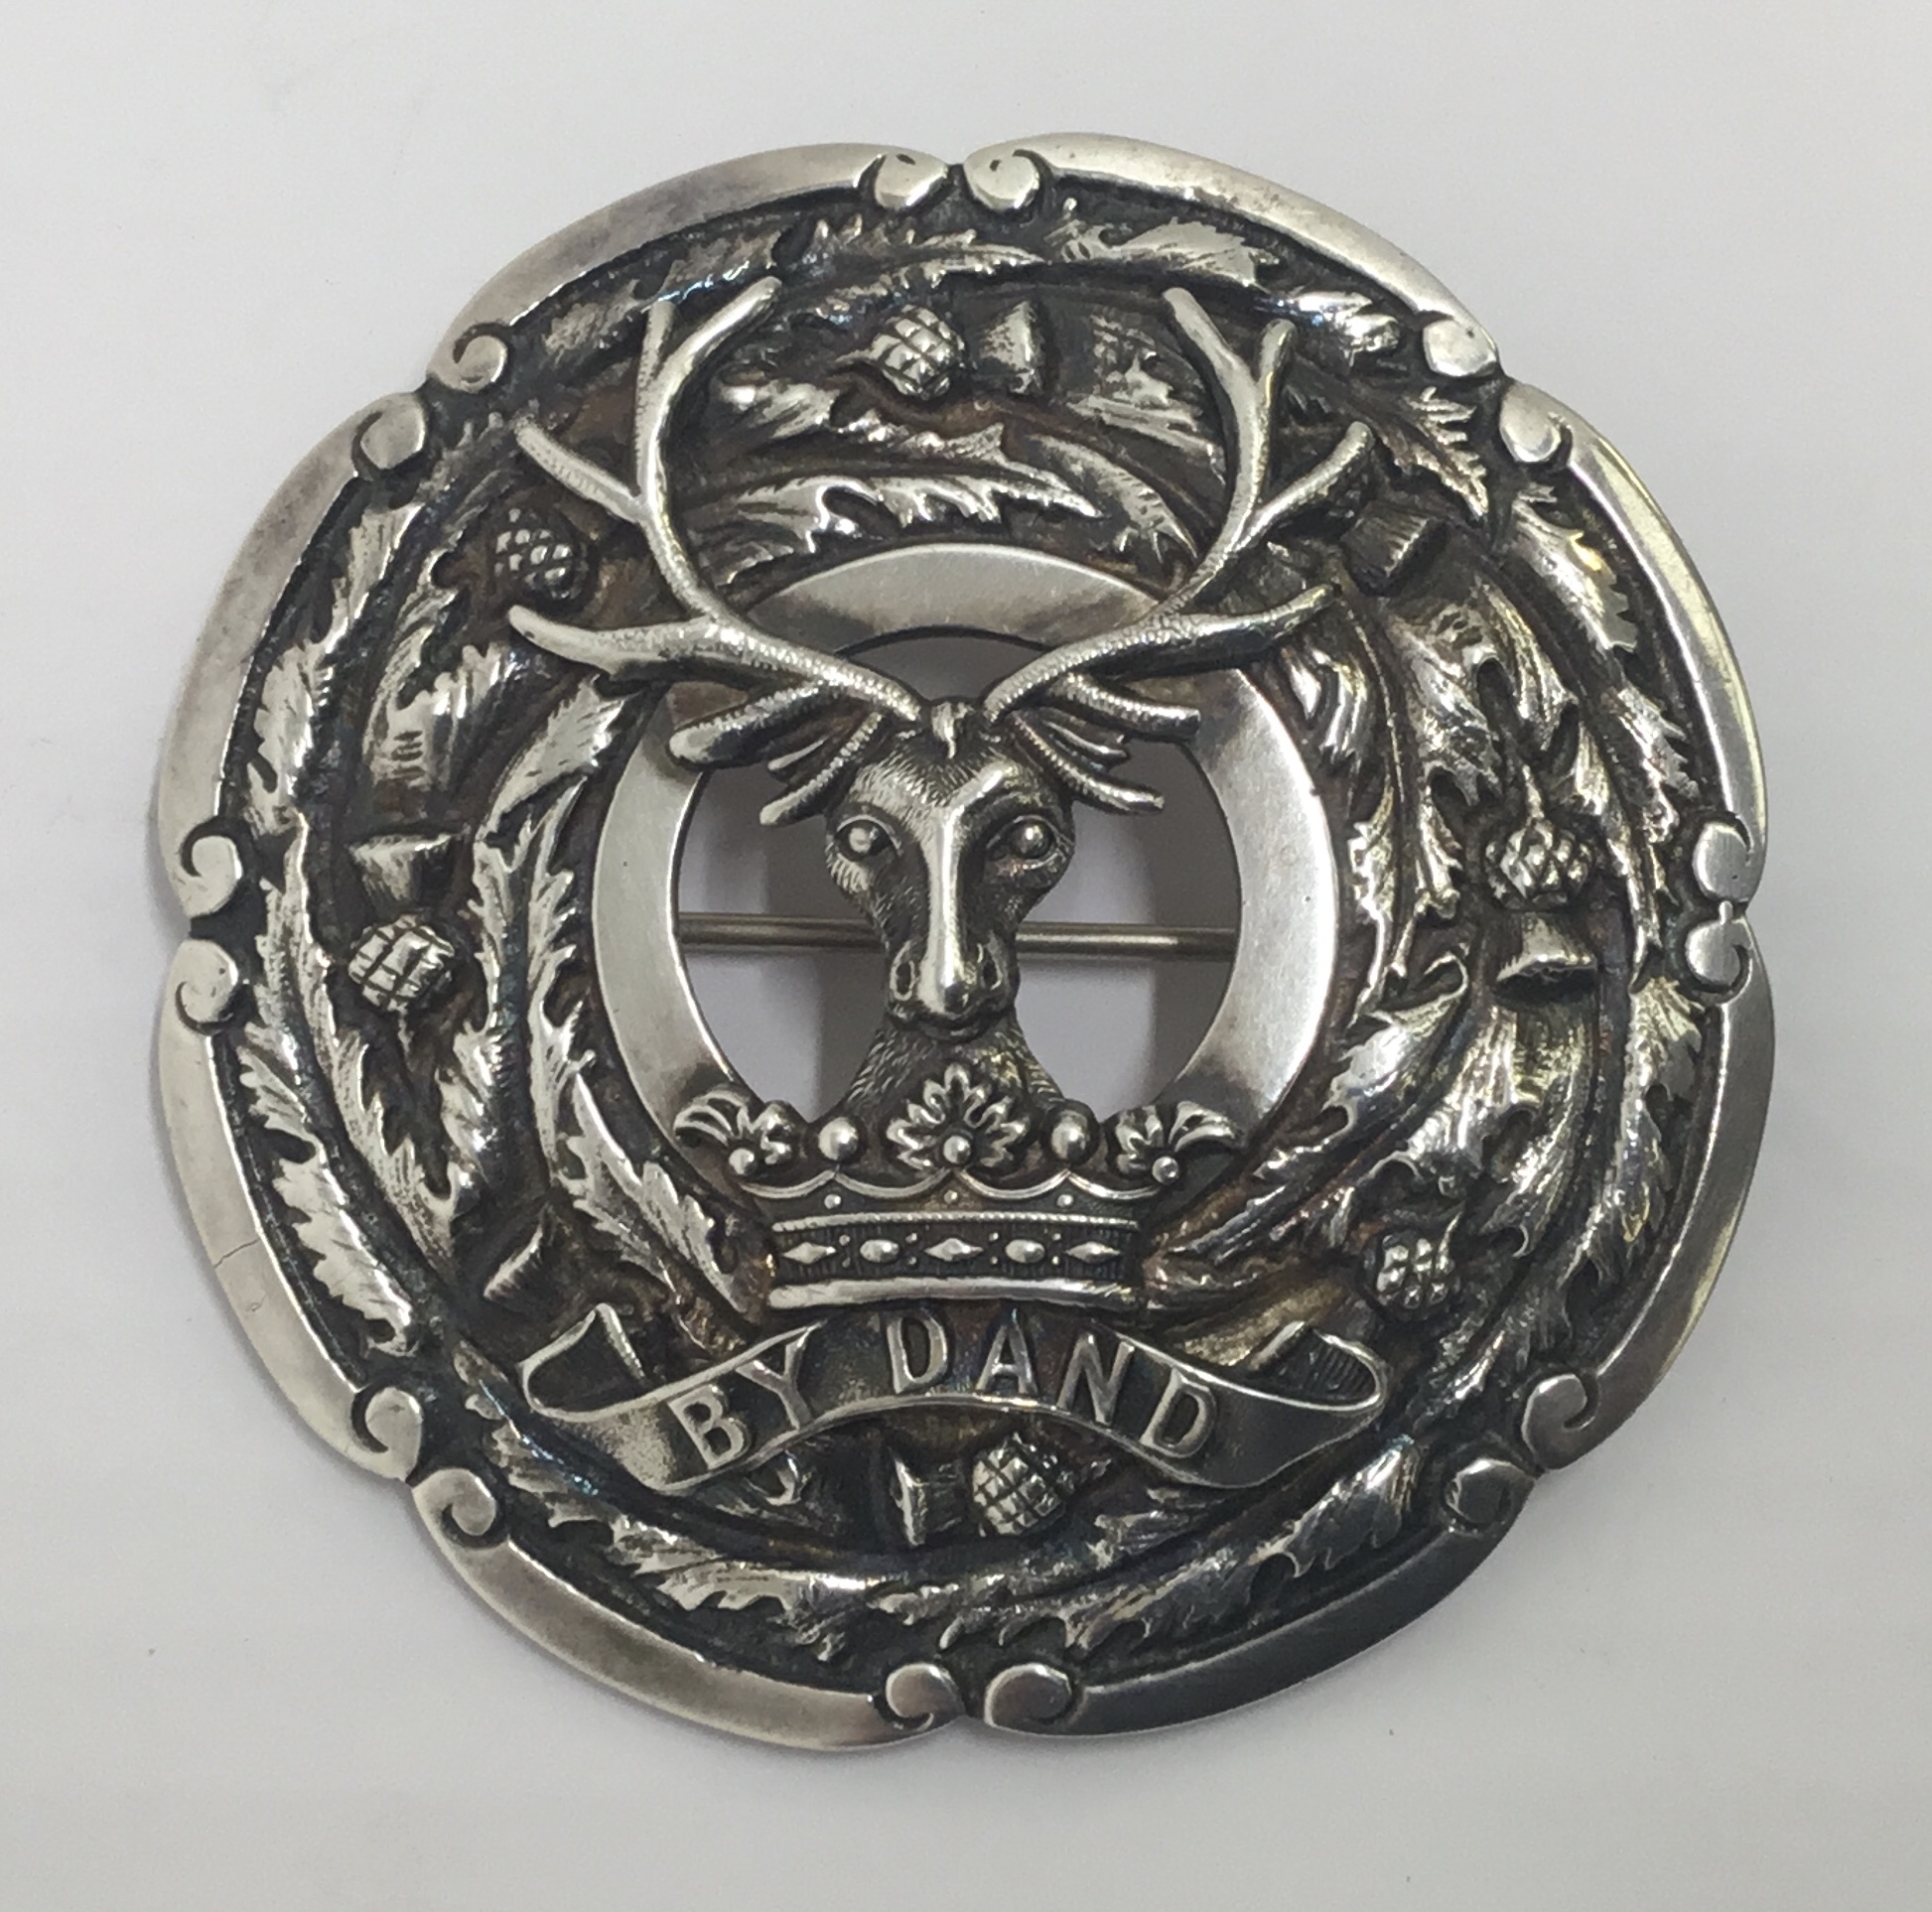 A good quality and heavy gauge, cast silvered (or possibly unmarked solid silver) Gordon Highlanders